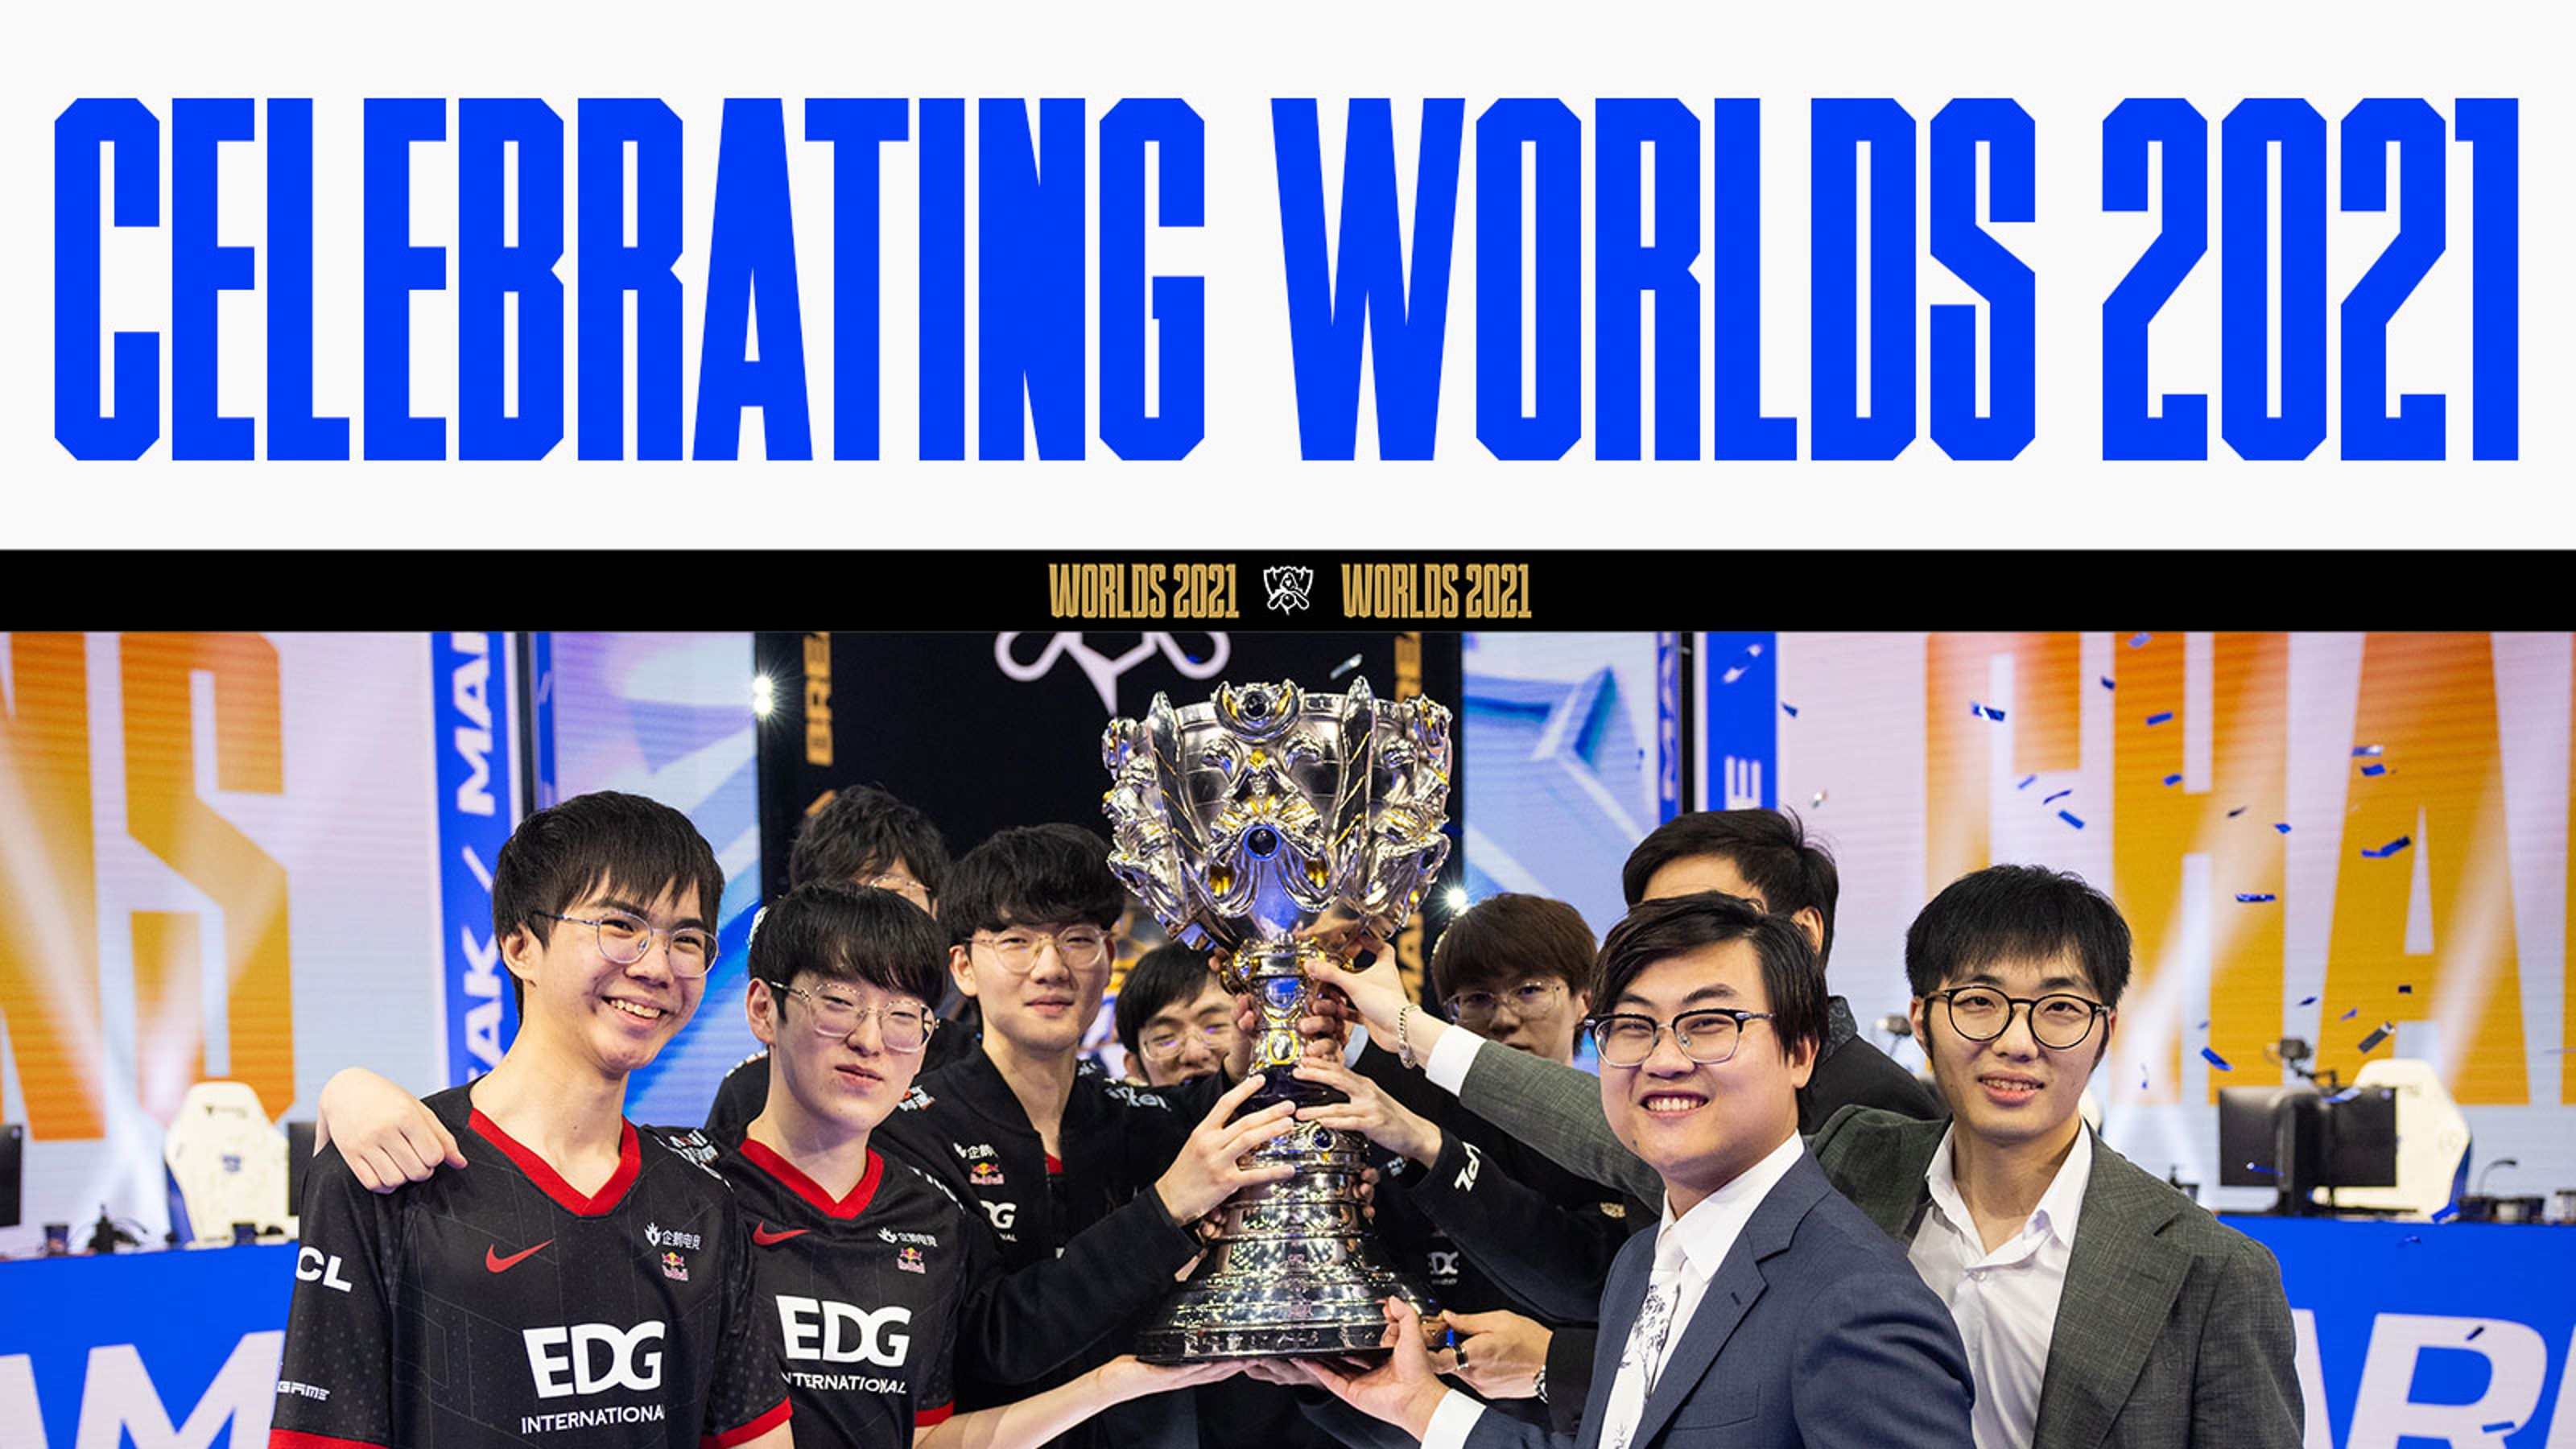 LoLEsports - Your home for LoL Esports news and Fun